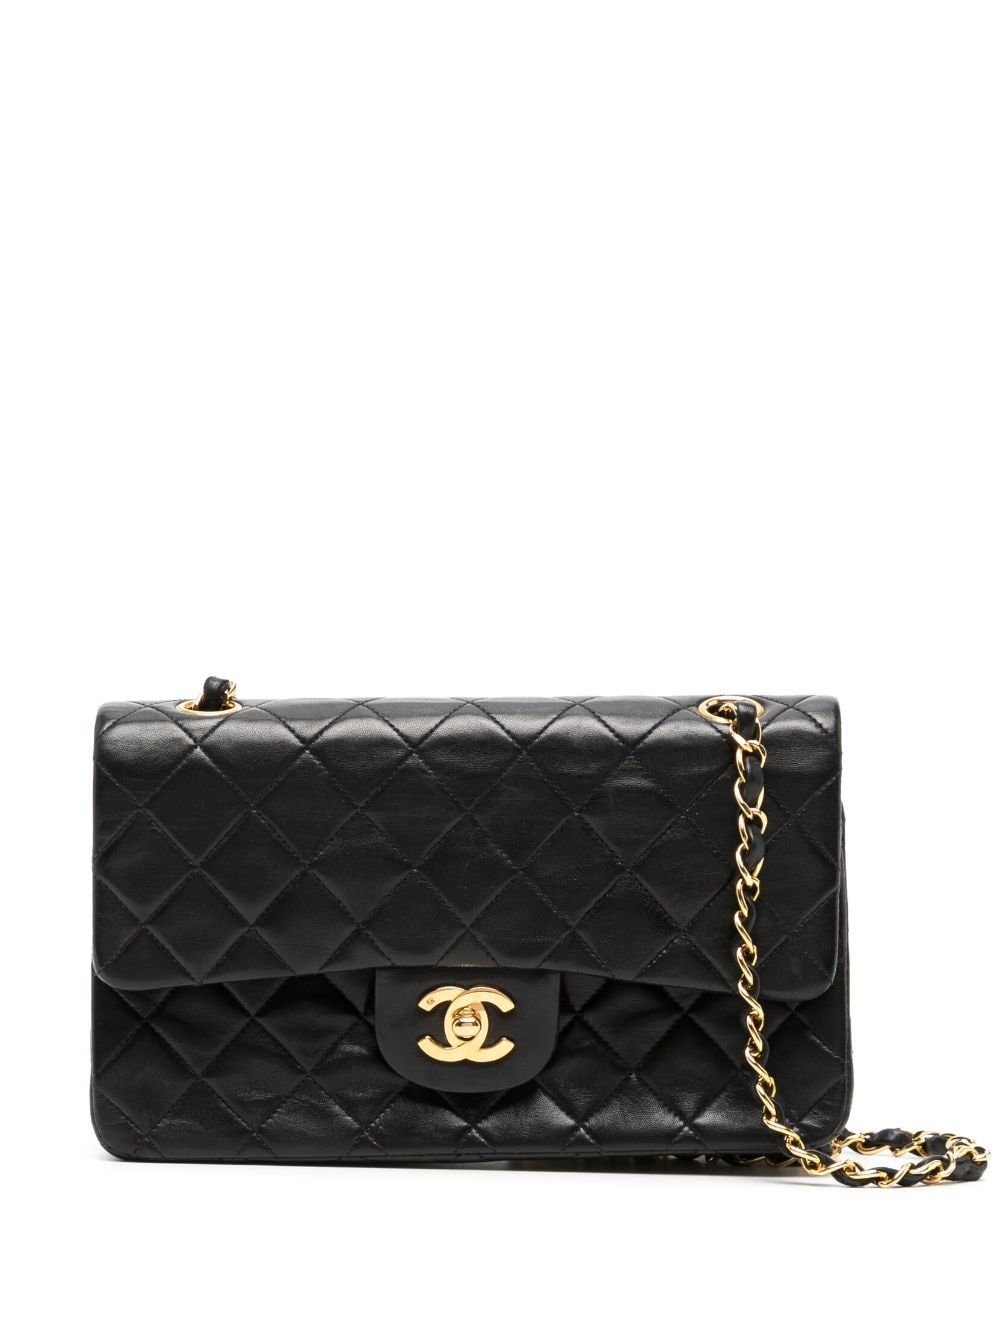 CHANEL Pre-Owned 1991-1994 Small Double Flap Shoulder Bag - Farfetch